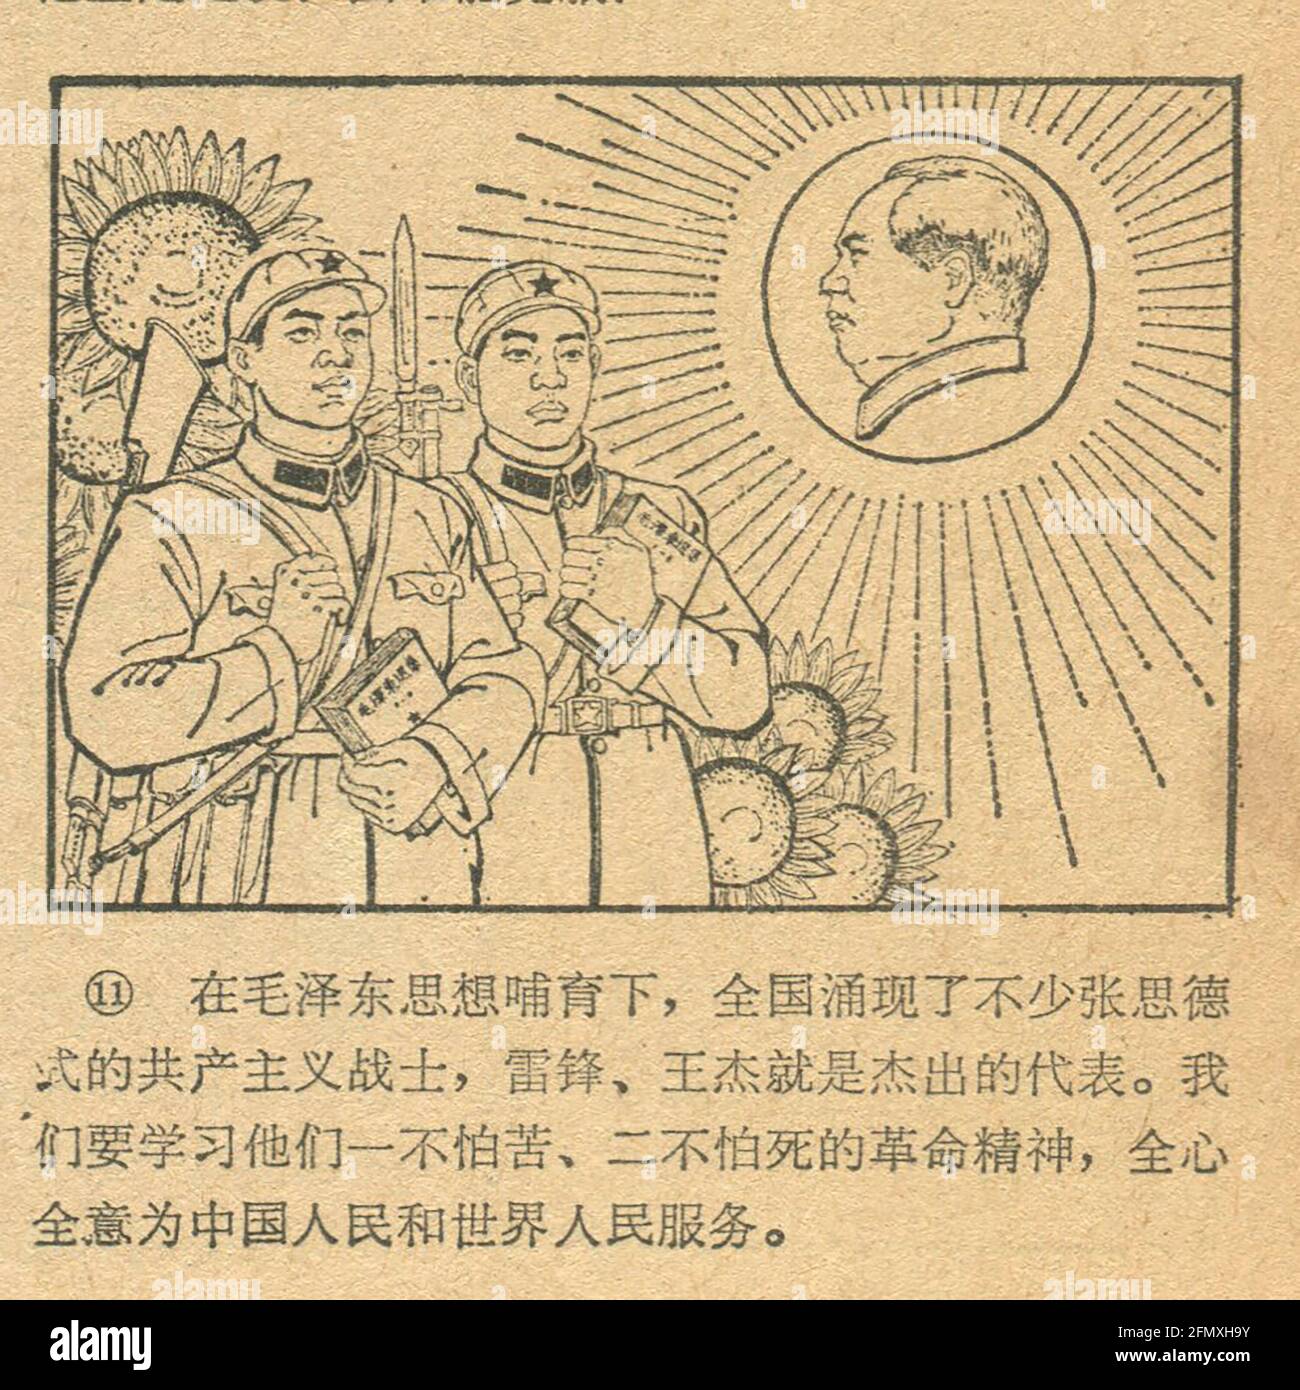 the comic about the story of communist fighter at "Chinese Woman" old weekly magazine during 1960s, the cultural revolution period Stock Photo